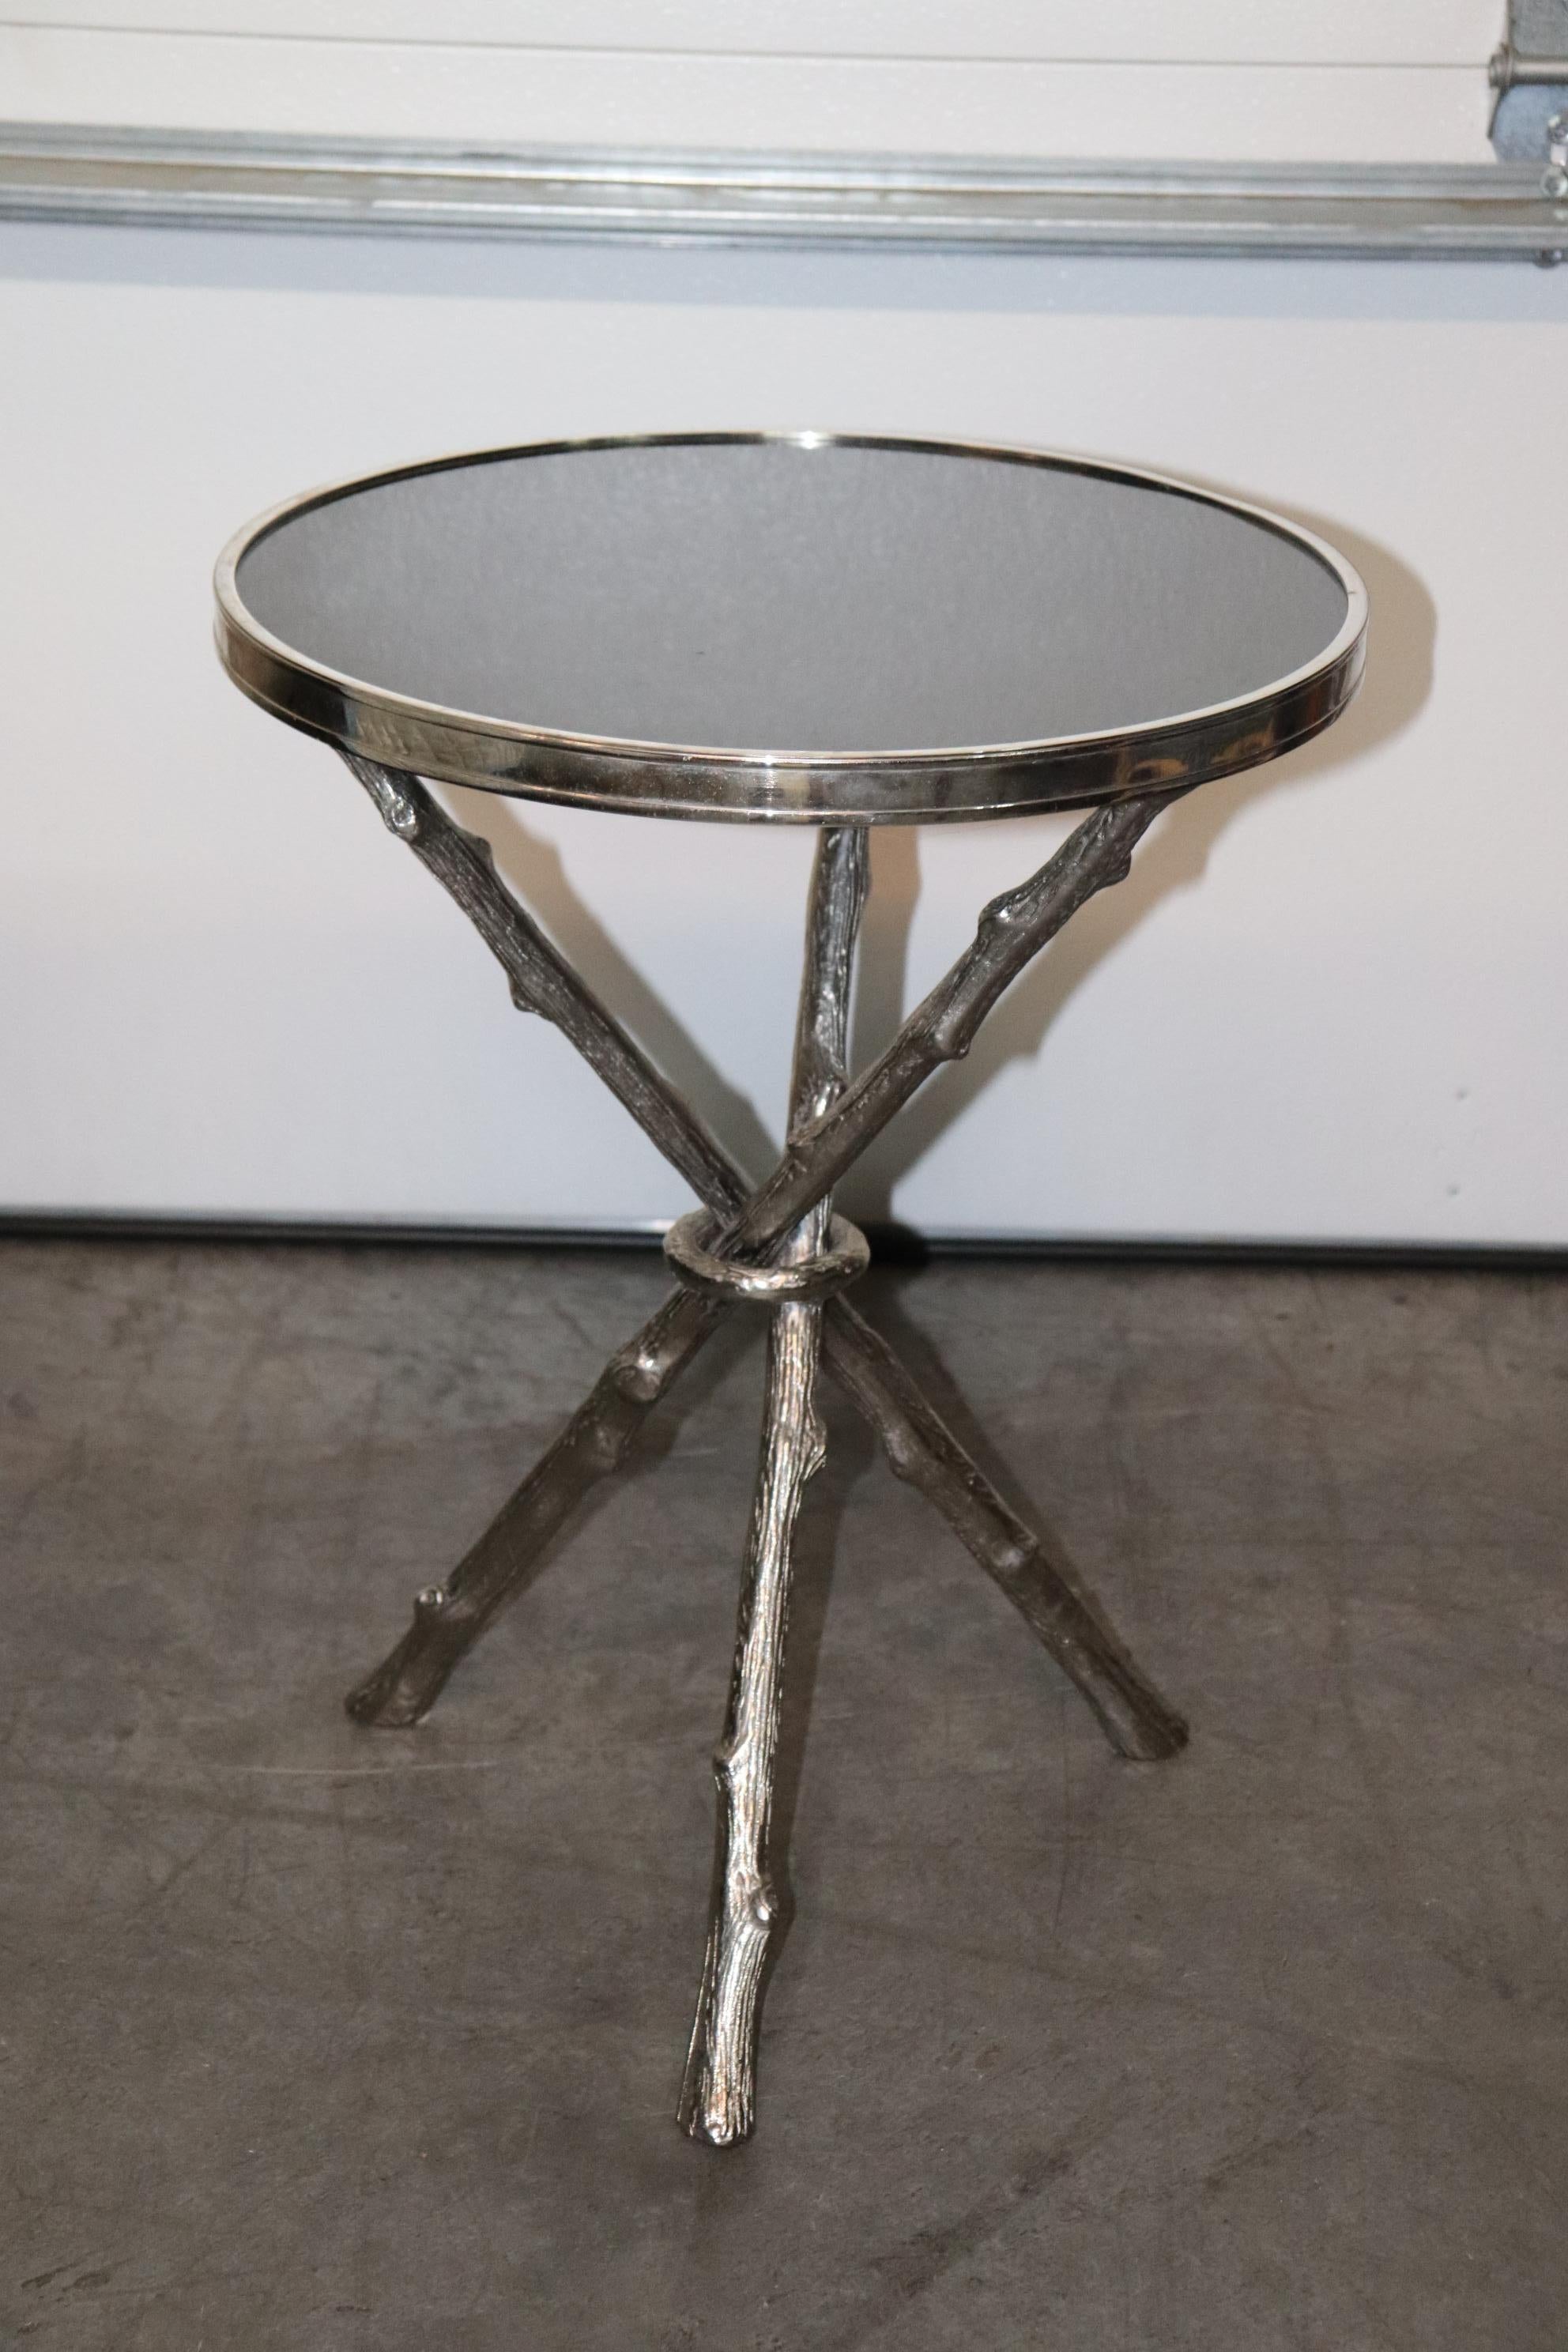 This is a superb chrome plated brass table in the style of Bagues in Faux Bois. The top is made of black granite and the table is in good condition. The table measures 14 x 14 wide x 23 tall. Dates to the 1990s or later. 